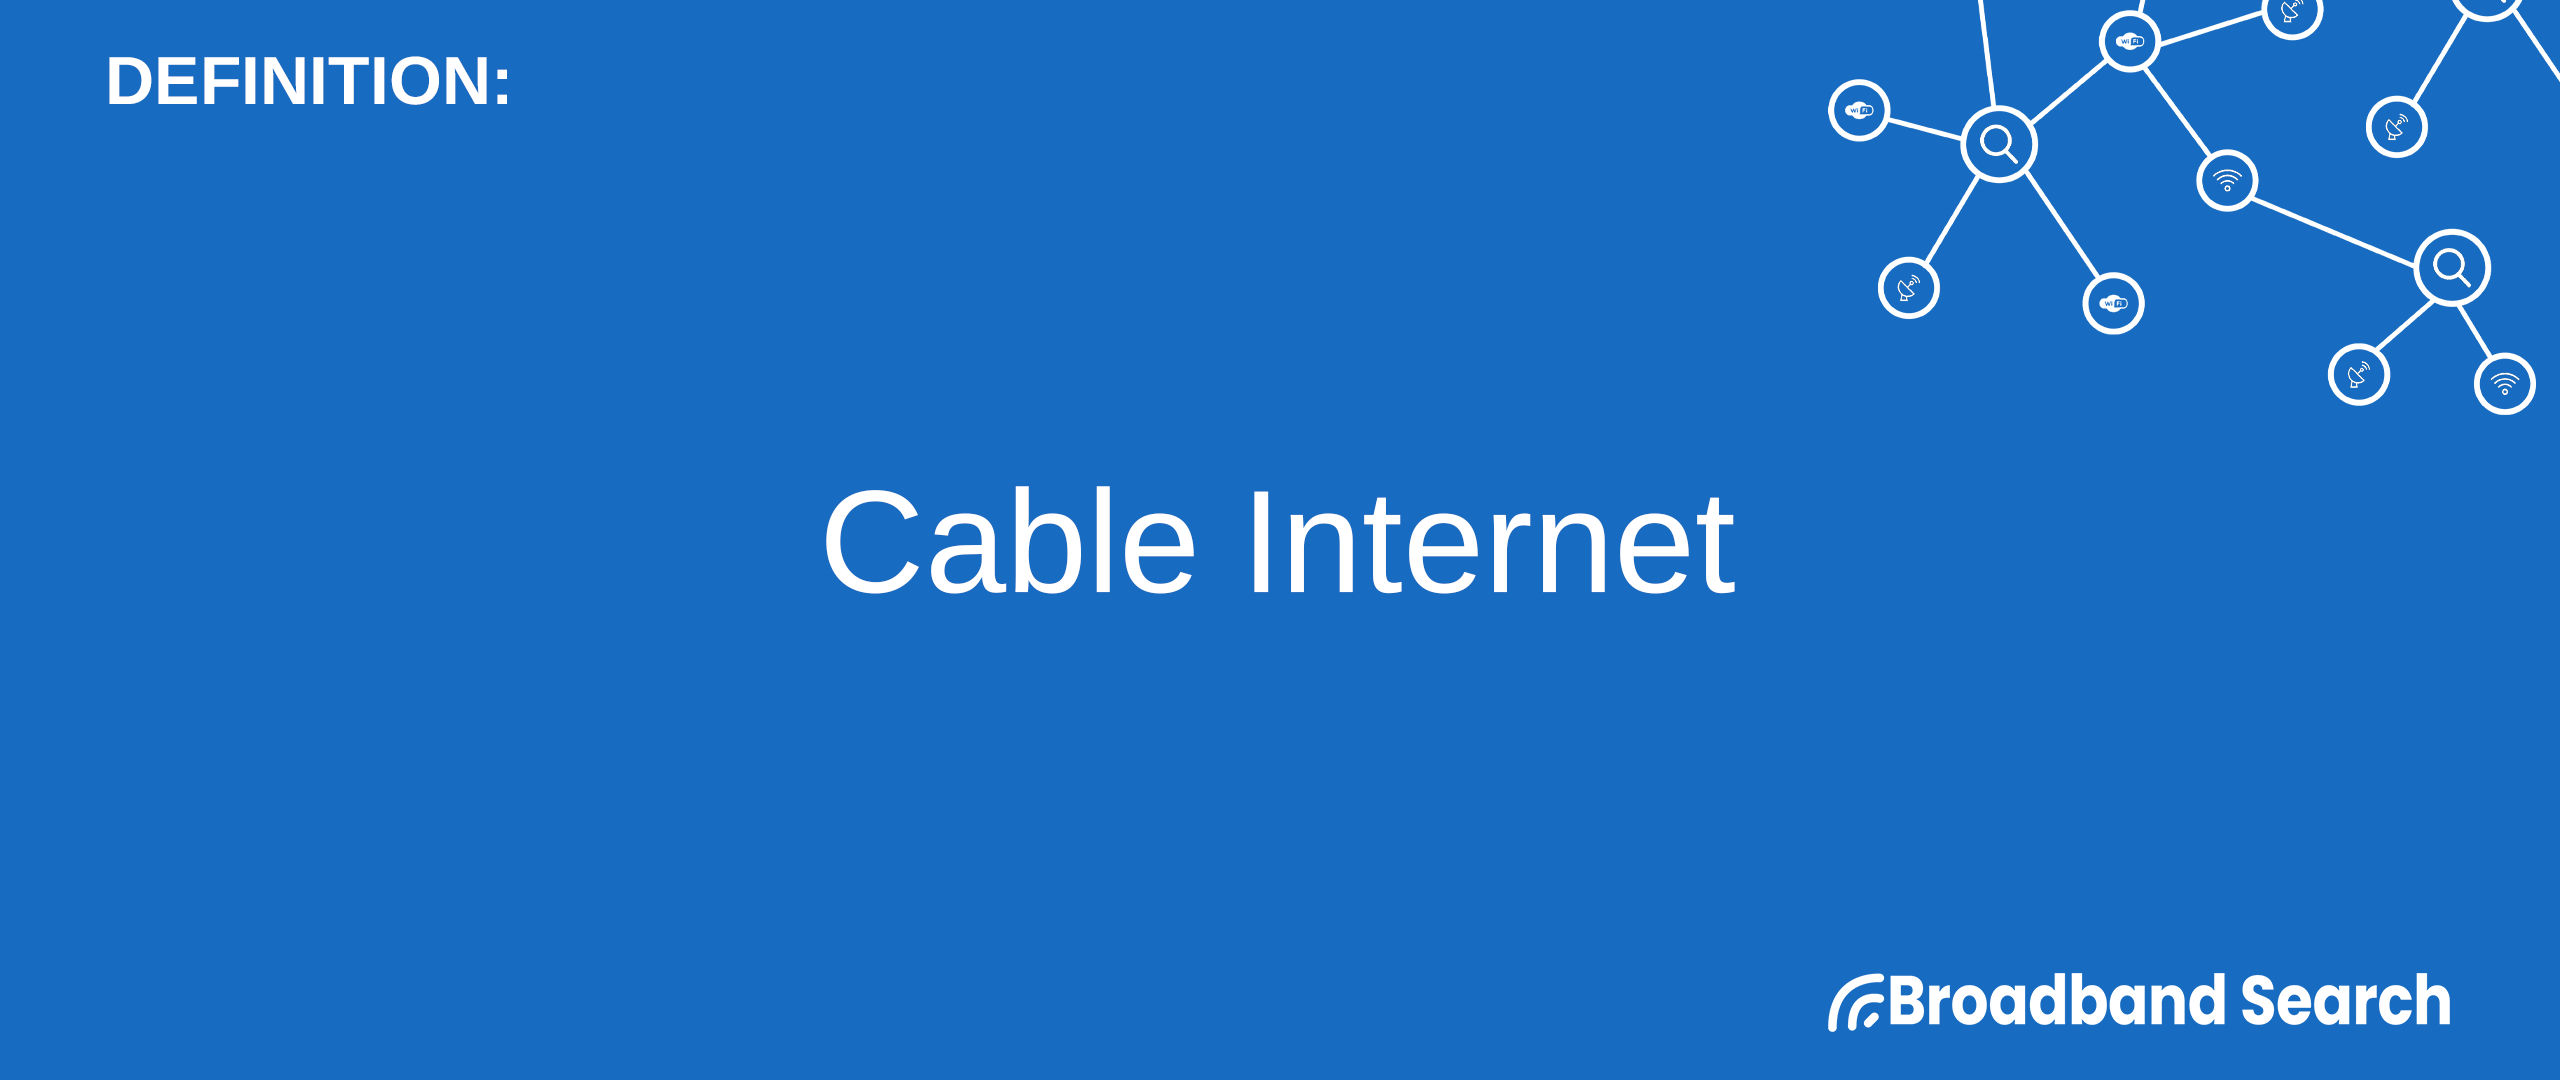 Cable Internet Service Explained